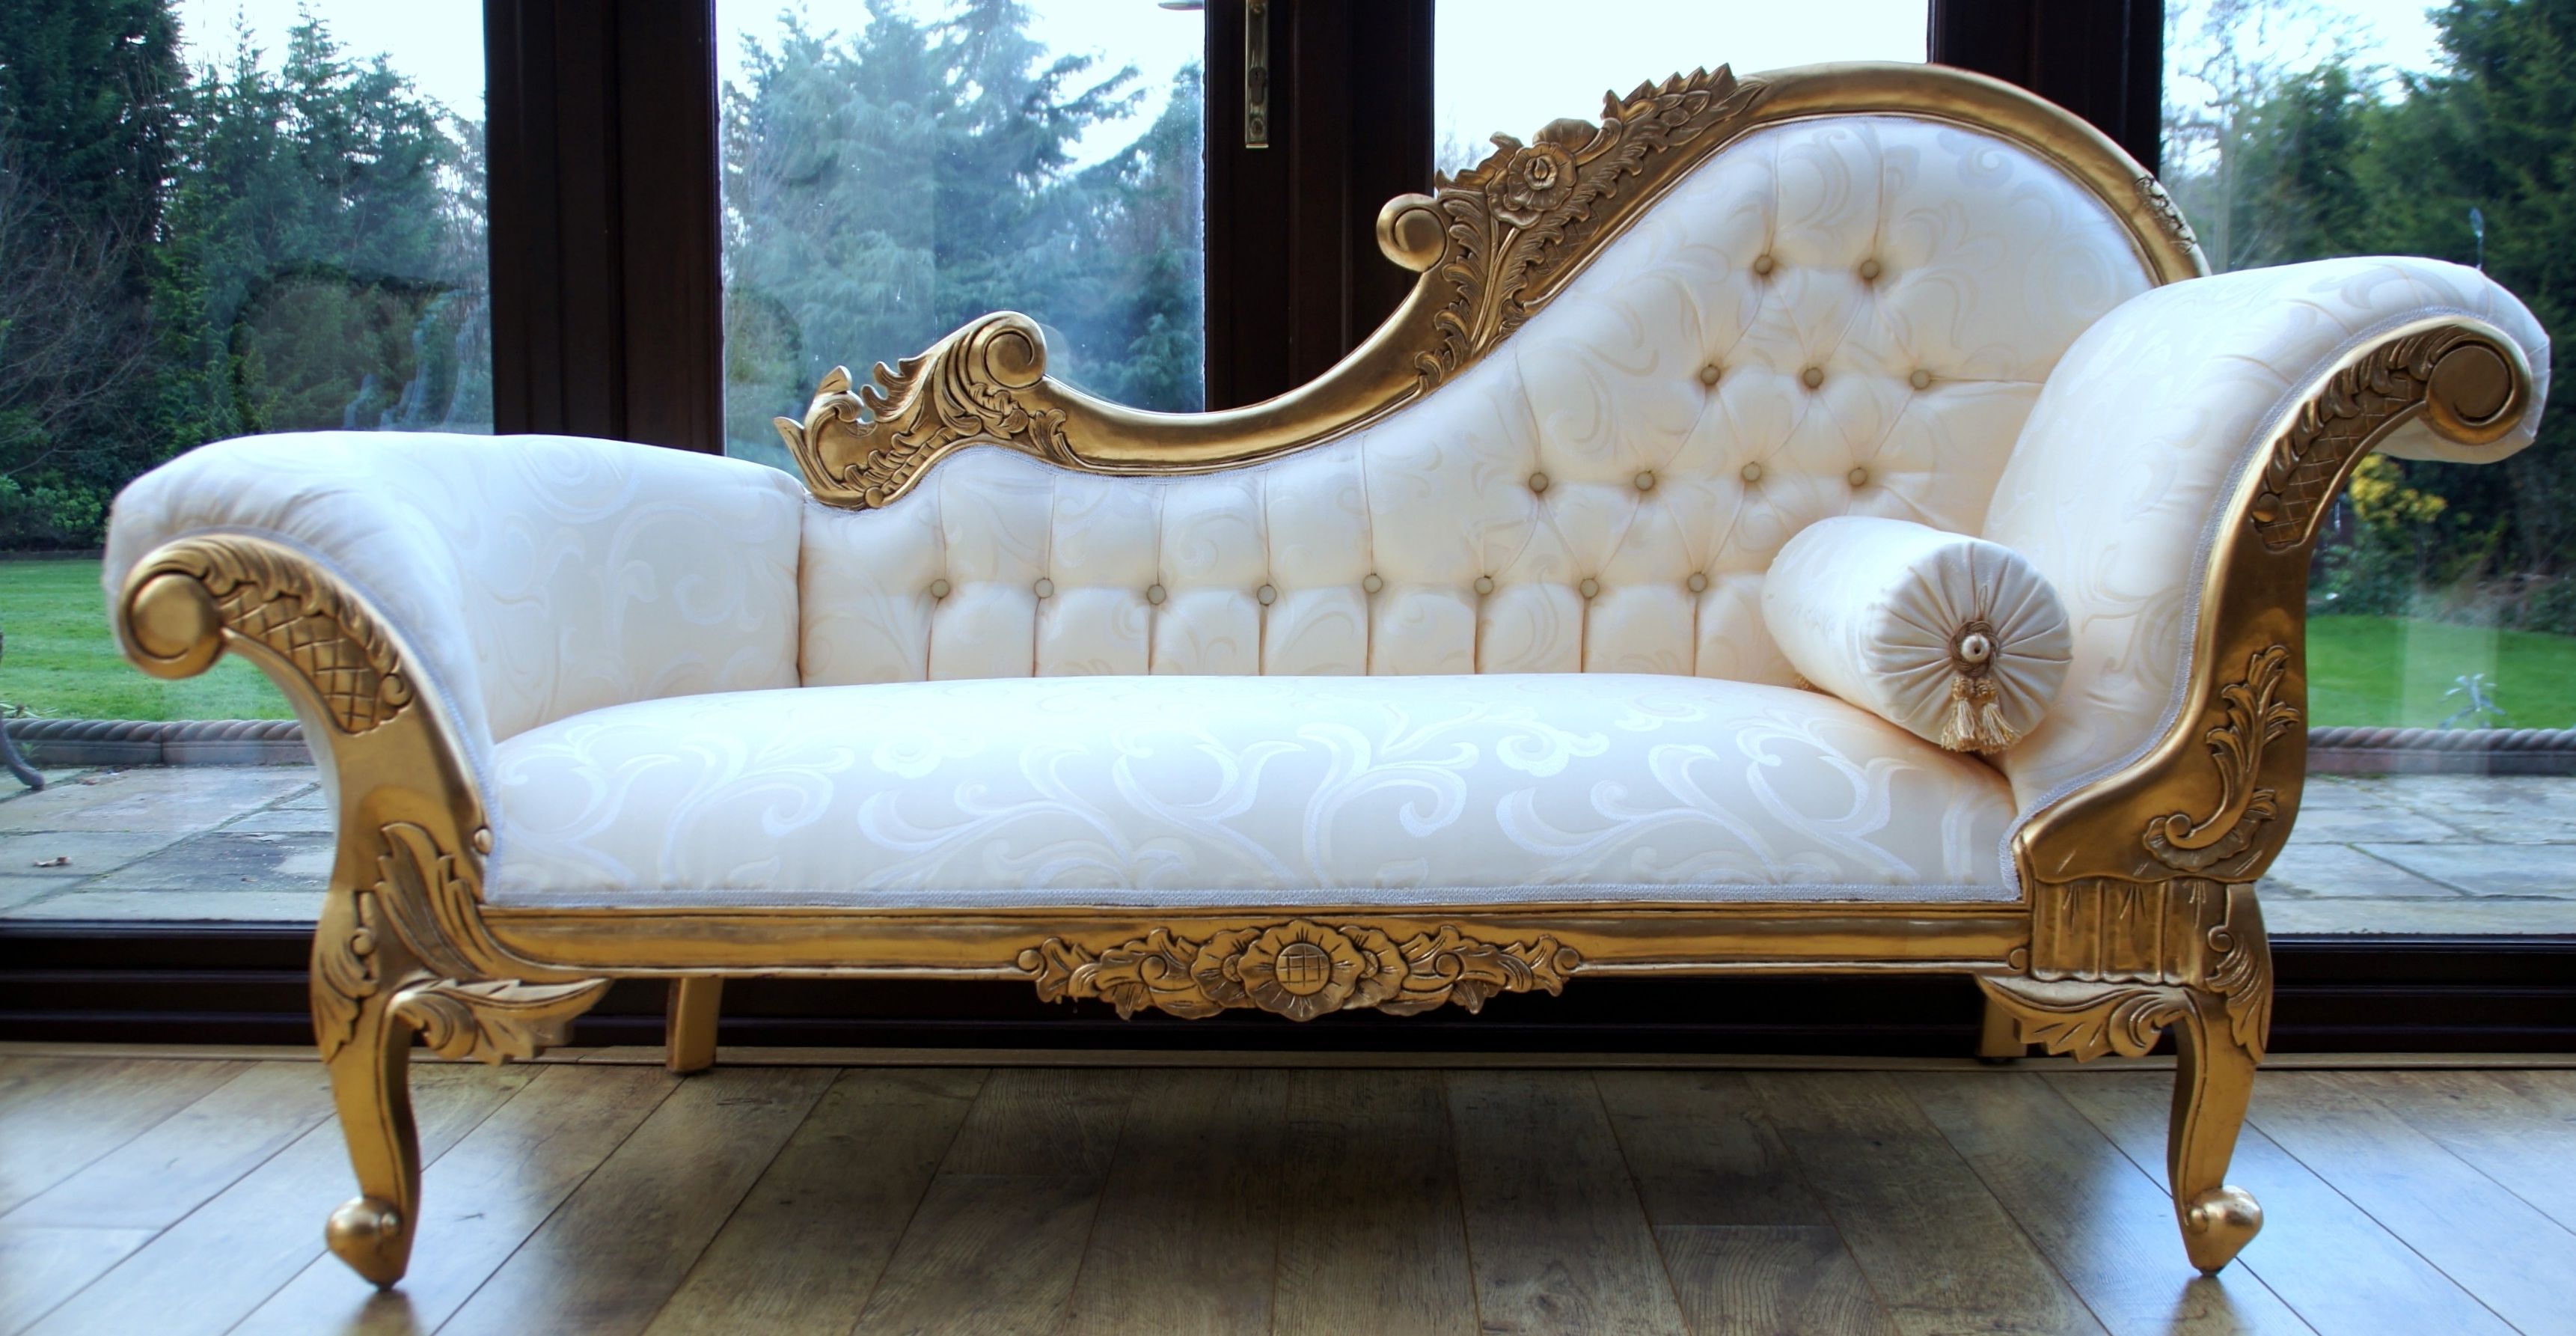 Well Known White And Intricate Carved Gold Bedroom Chaise Lounge Chair With Inside Gold Chaise Lounge Chairs (View 2 of 15)